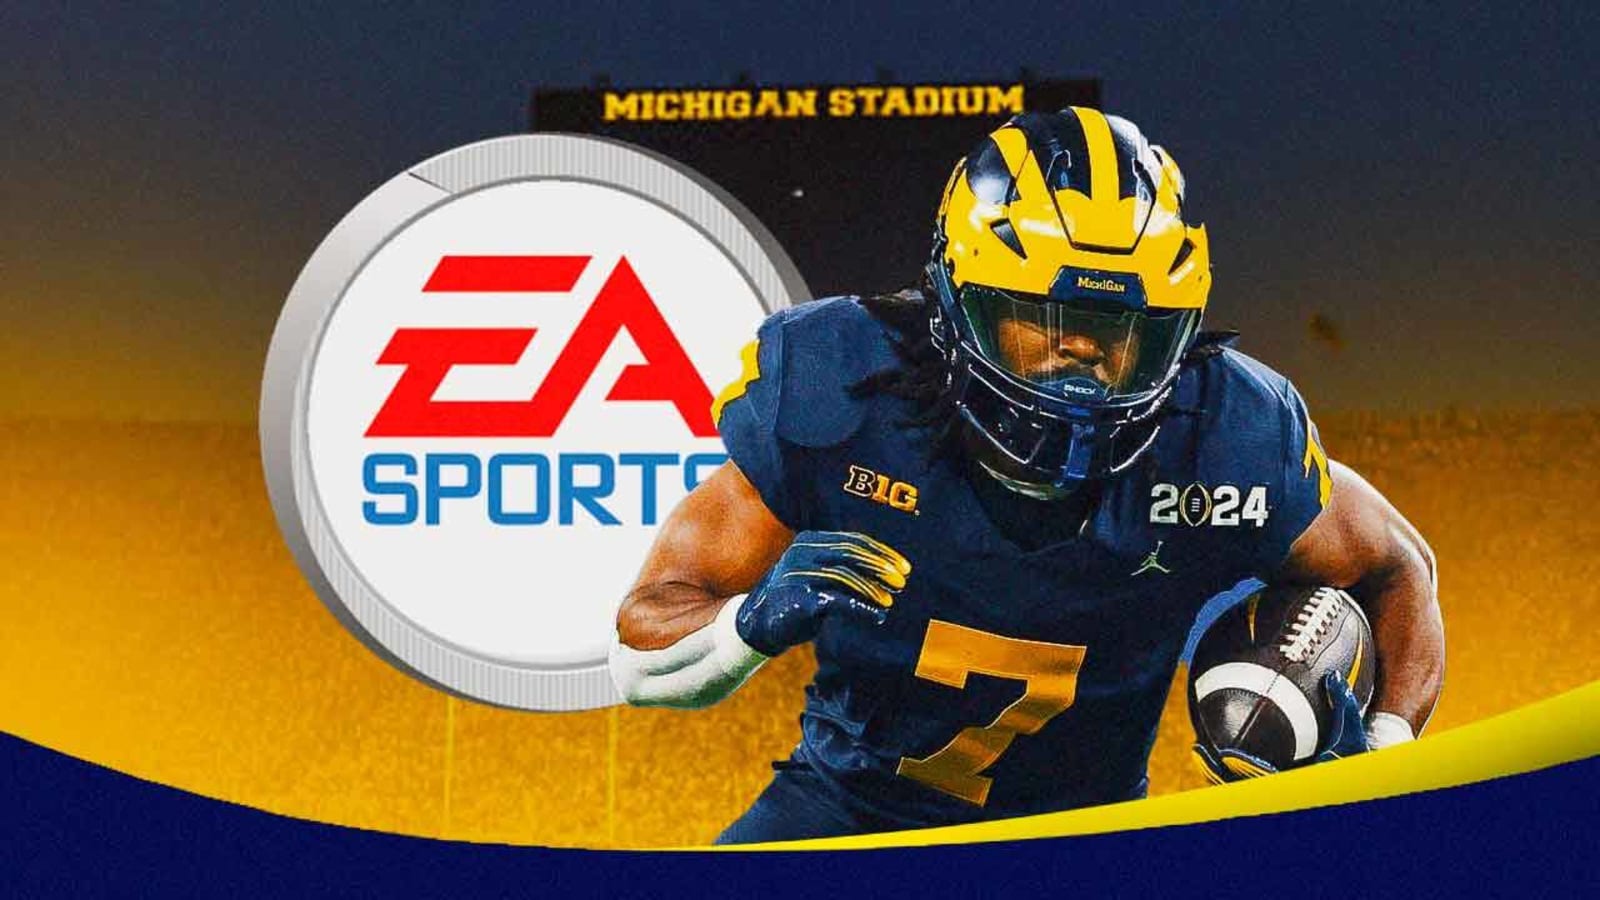 Donovan Edwards gracing NCAA 25 cover has Michigan football fans fired up